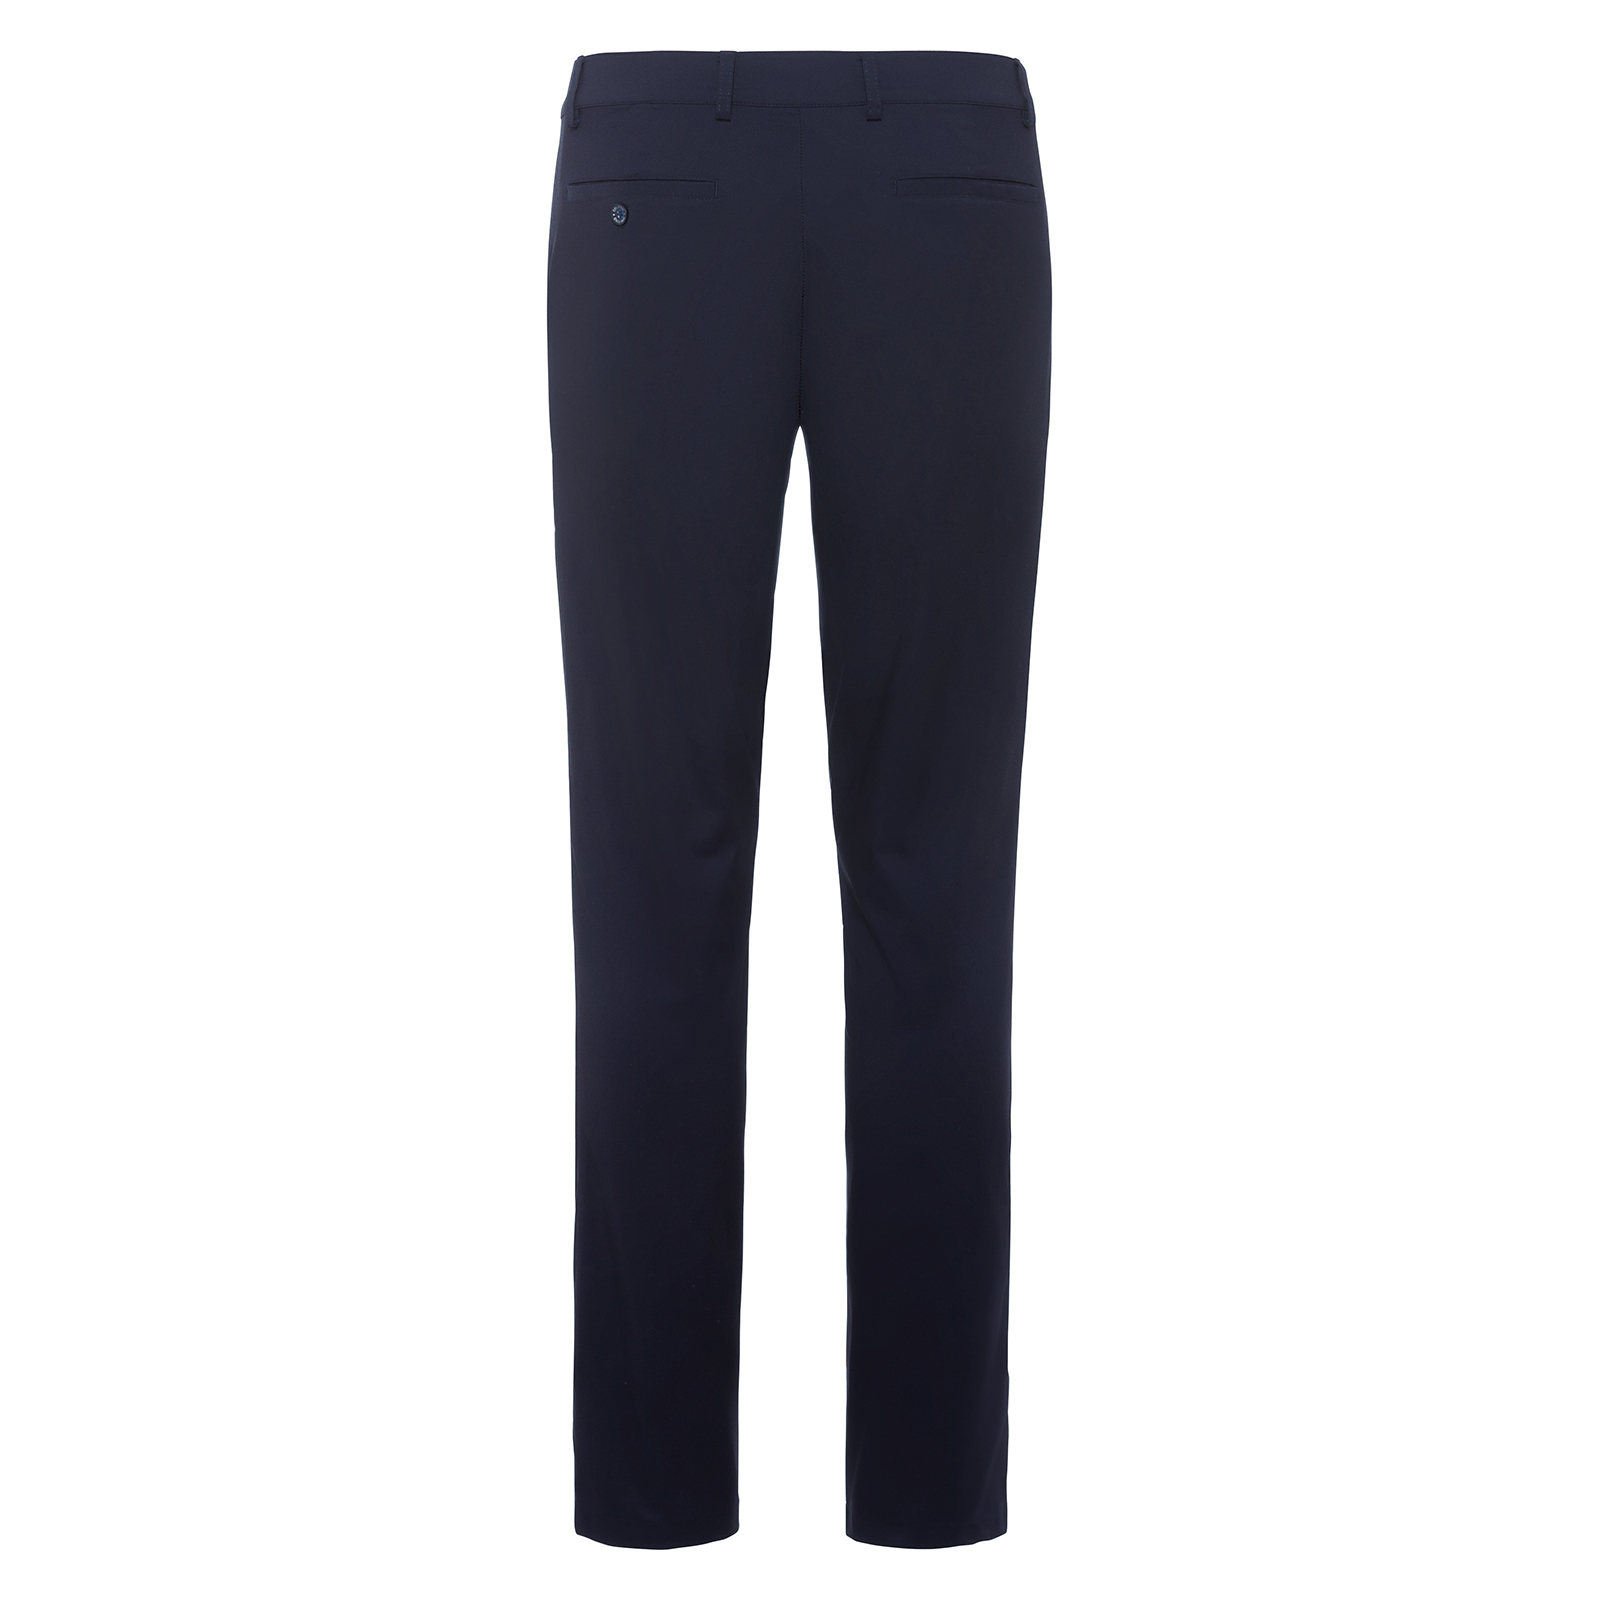 Men's golf trousers with stretch function